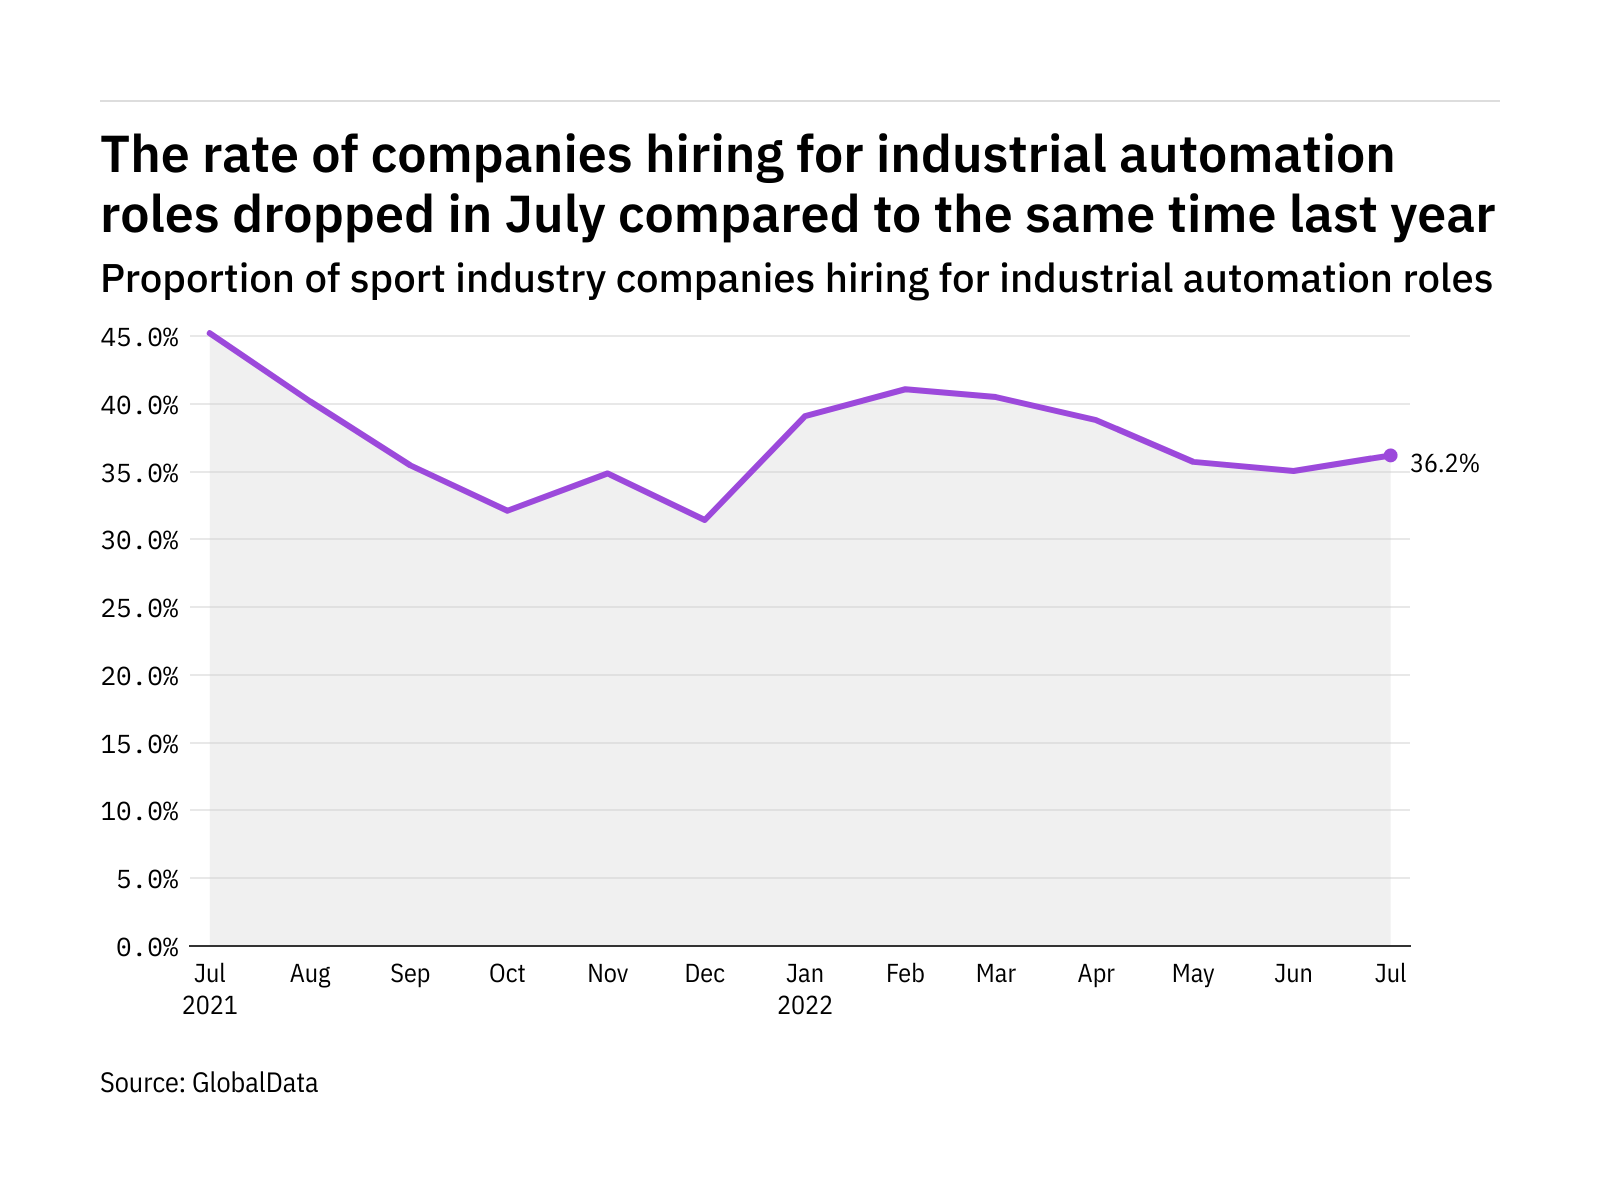 Industrial automation hiring levels in the sport industry dropped in July 2022